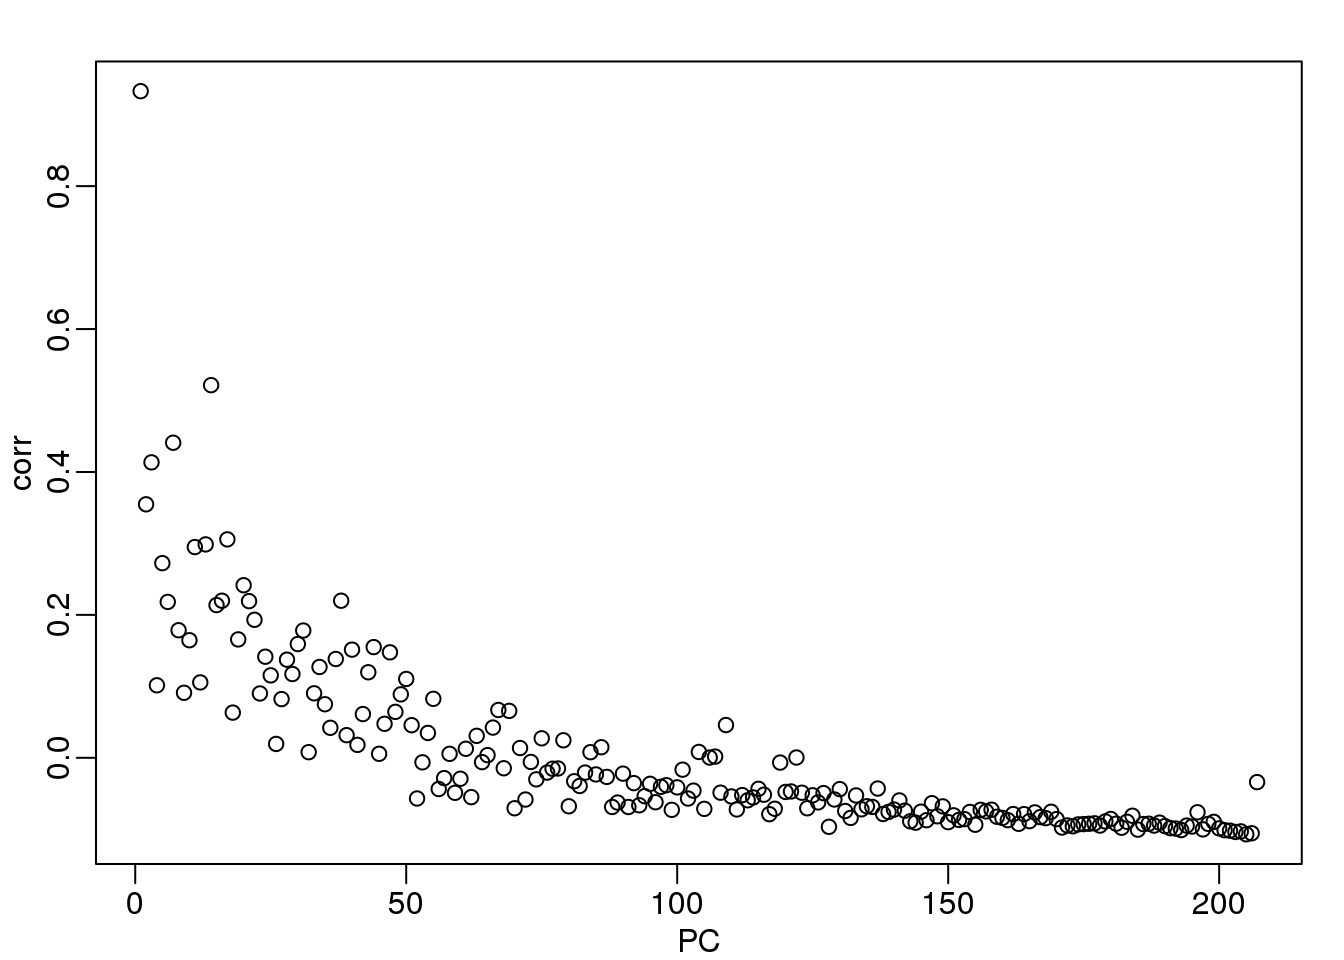 Adjusted R-squared after fitting a model with each month as a factor to each PC.